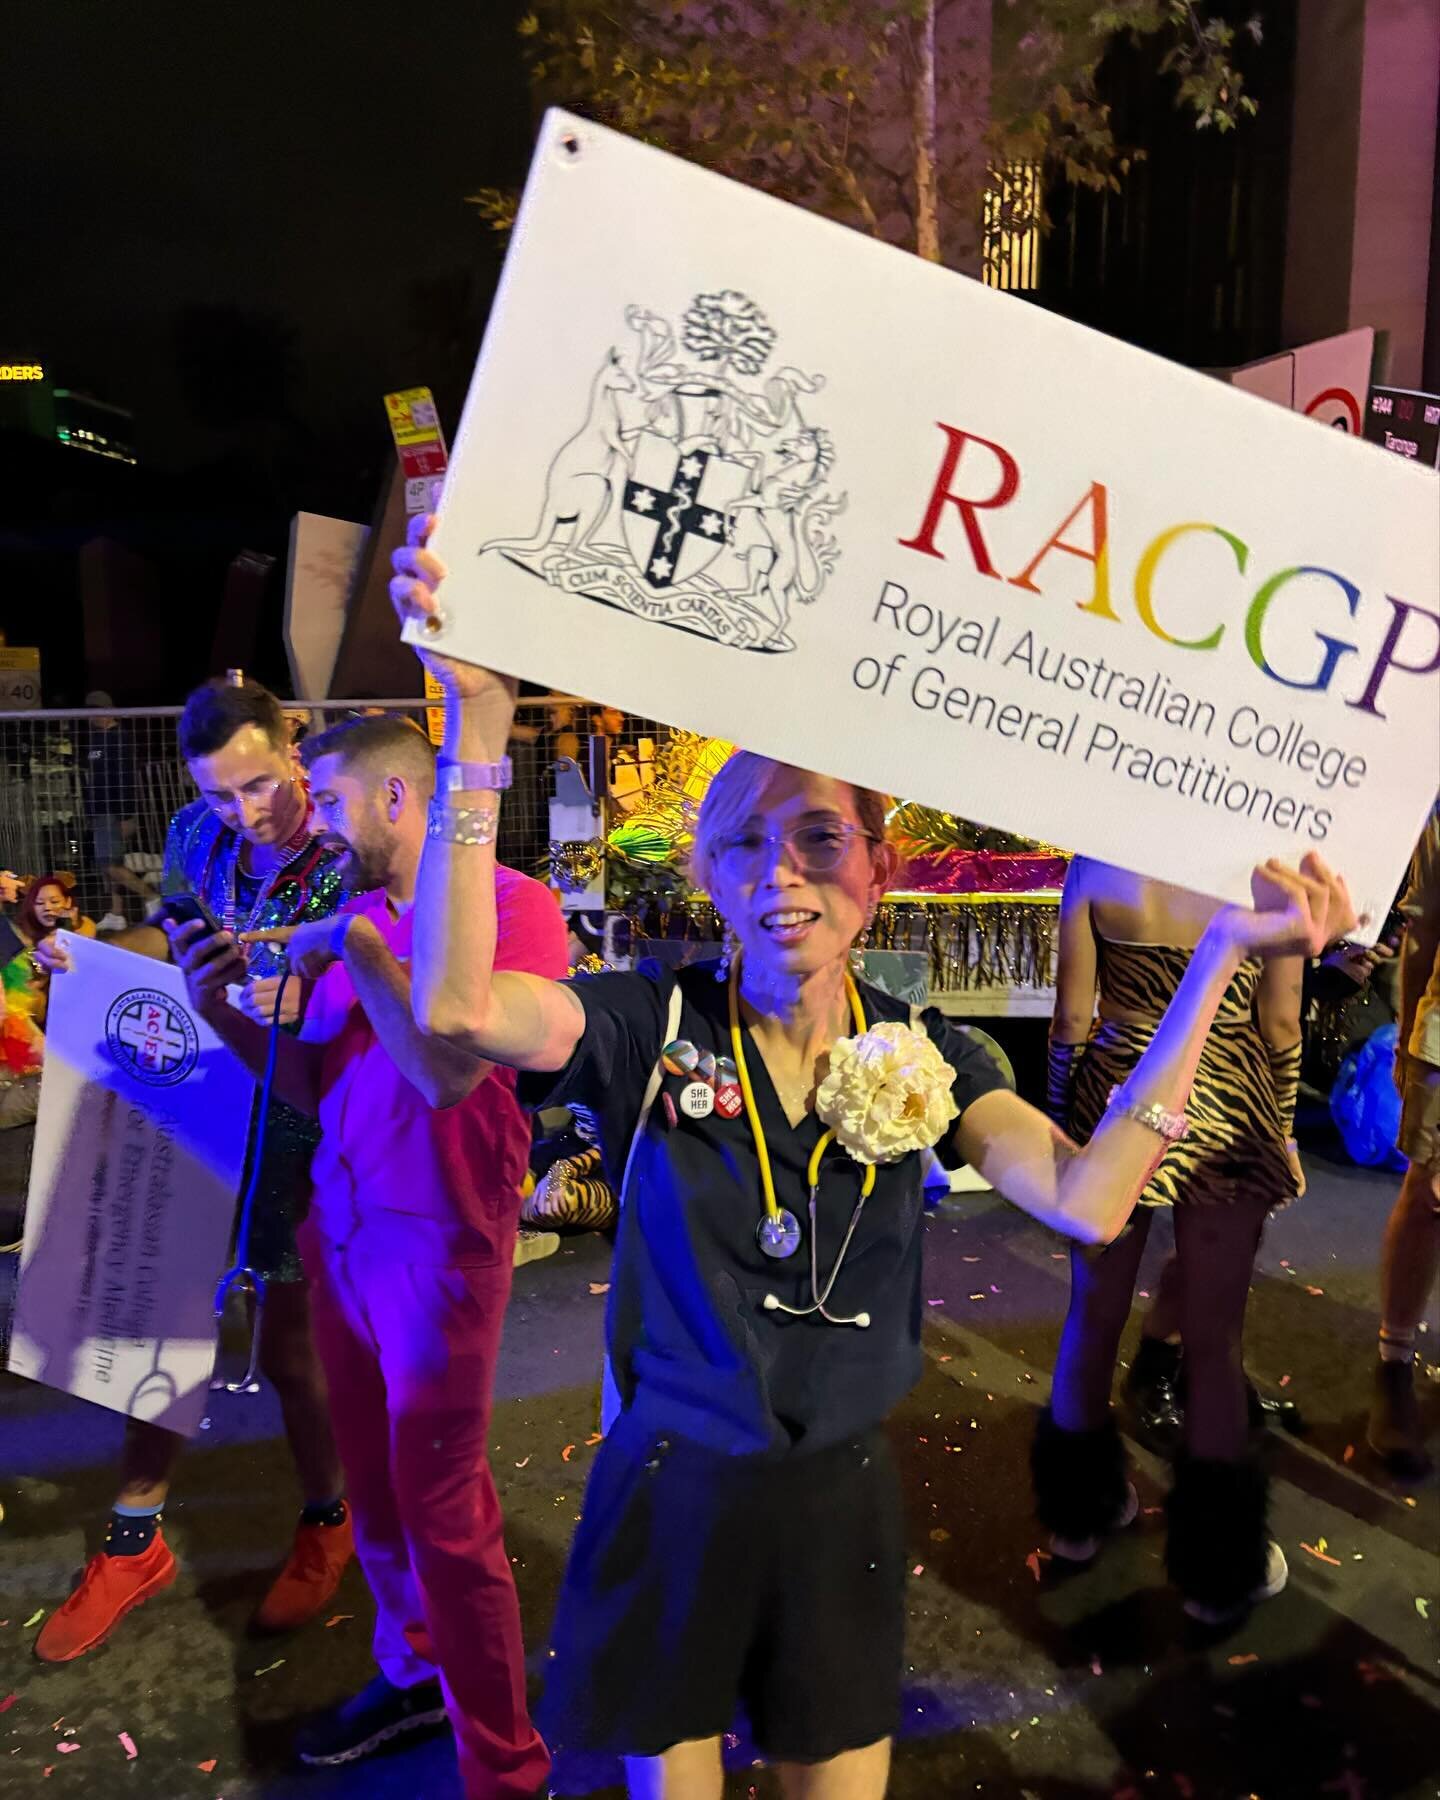 And a HUGE shoutout to the 13 Australian and Aotearoa New Zealand medical colleges (ACEM, ACRRM, ANZCA, NZCPHM, RACGP, RACP, RACS, RACMA, RANZCOG, RANZCO, RANZCP, RANZCR &amp; AGES) who supported Pride in Medicine marching this year! Standing up and 